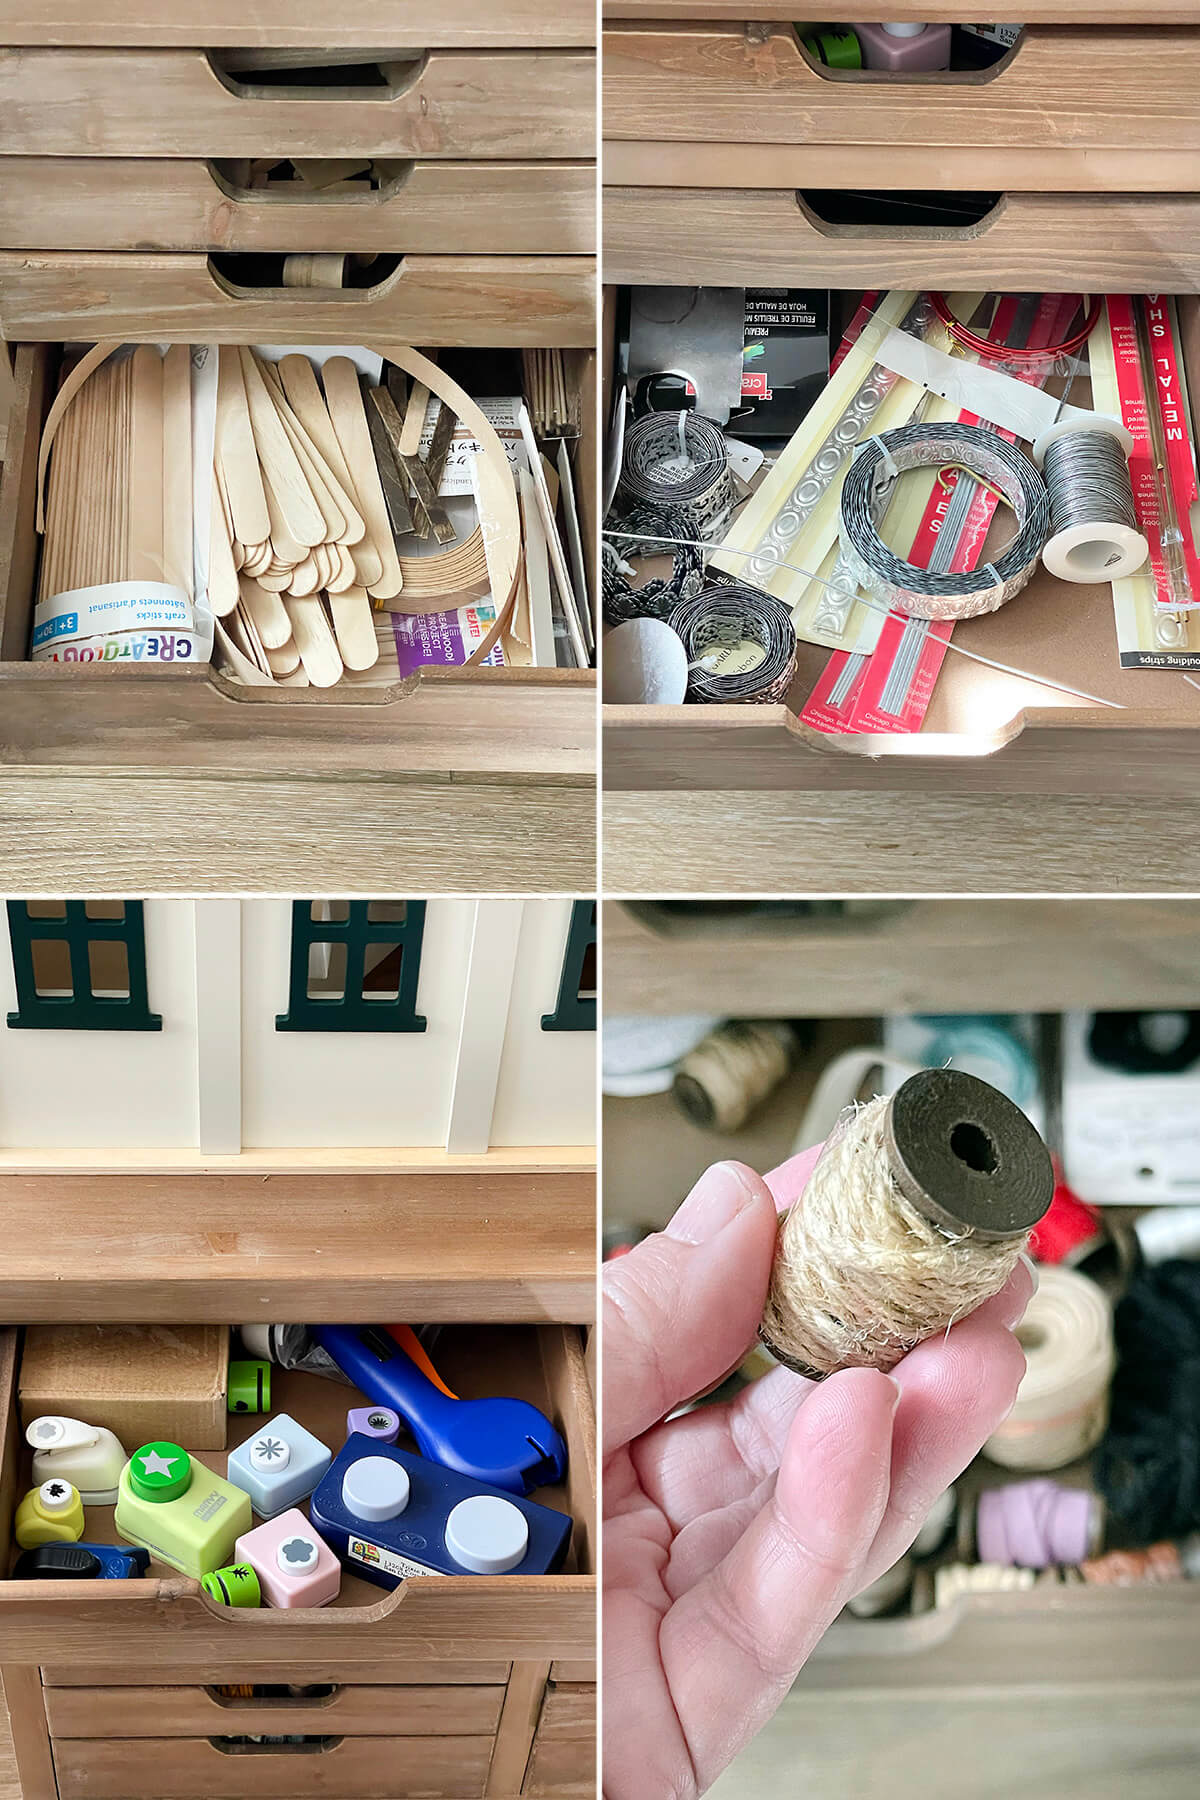 Collage of what is inside 4 drawers in a rolling cart